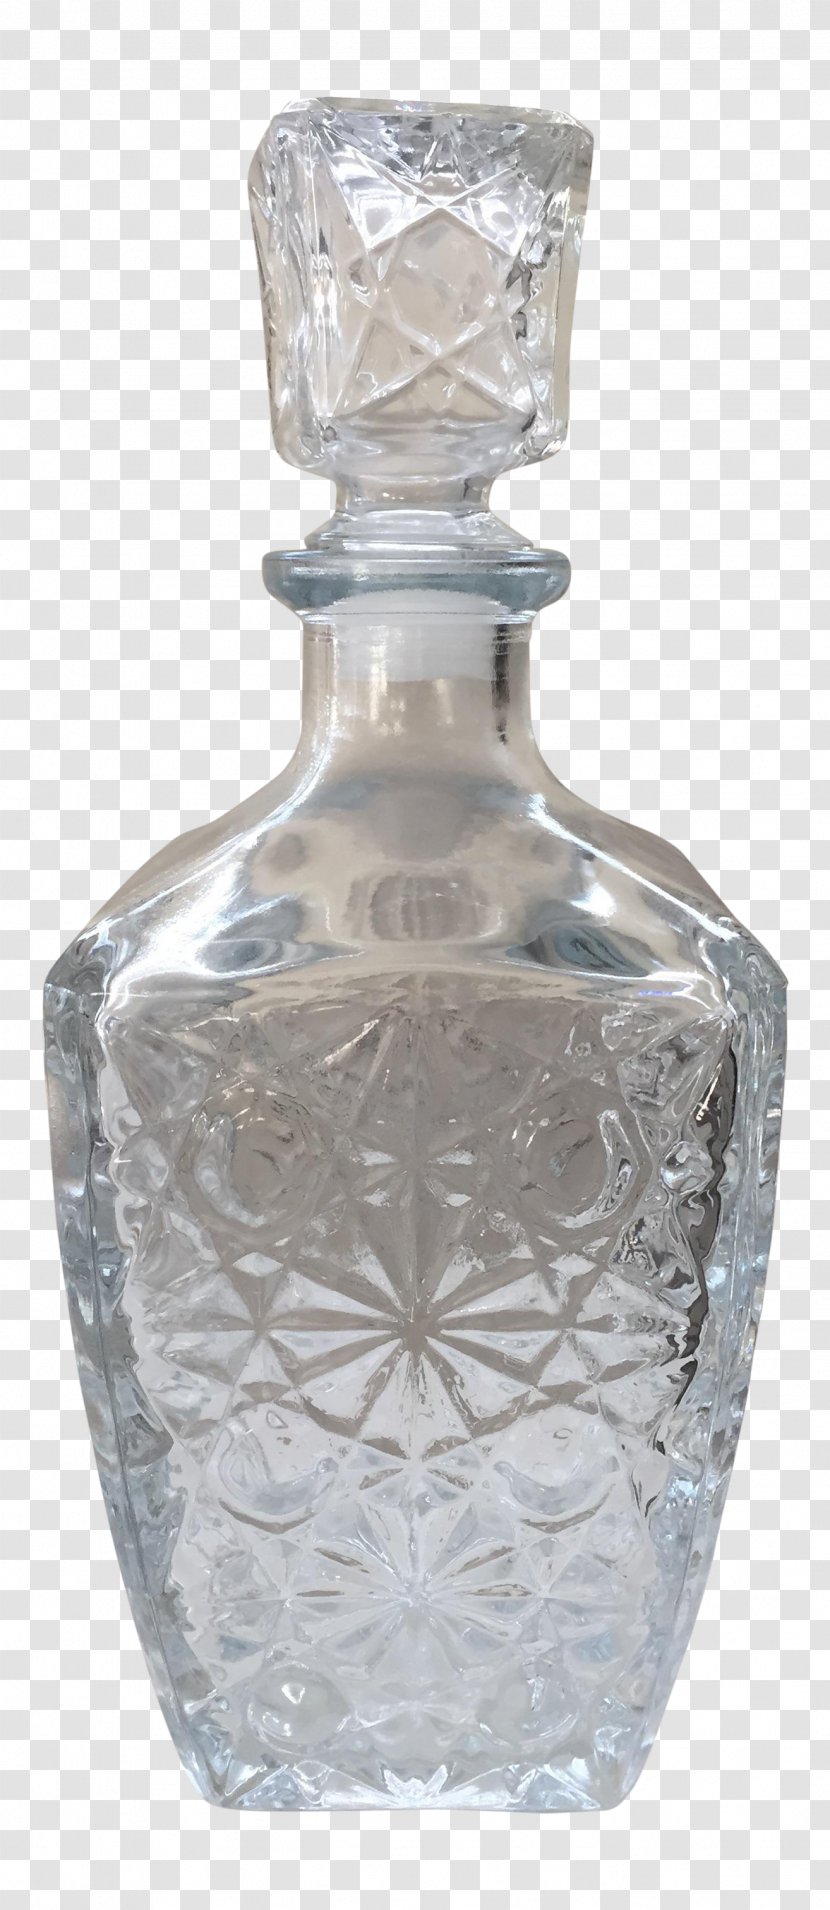 Glass Bottle Decanter Unbreakable - Barware - Irish Whiskey Decanters Transparent PNG